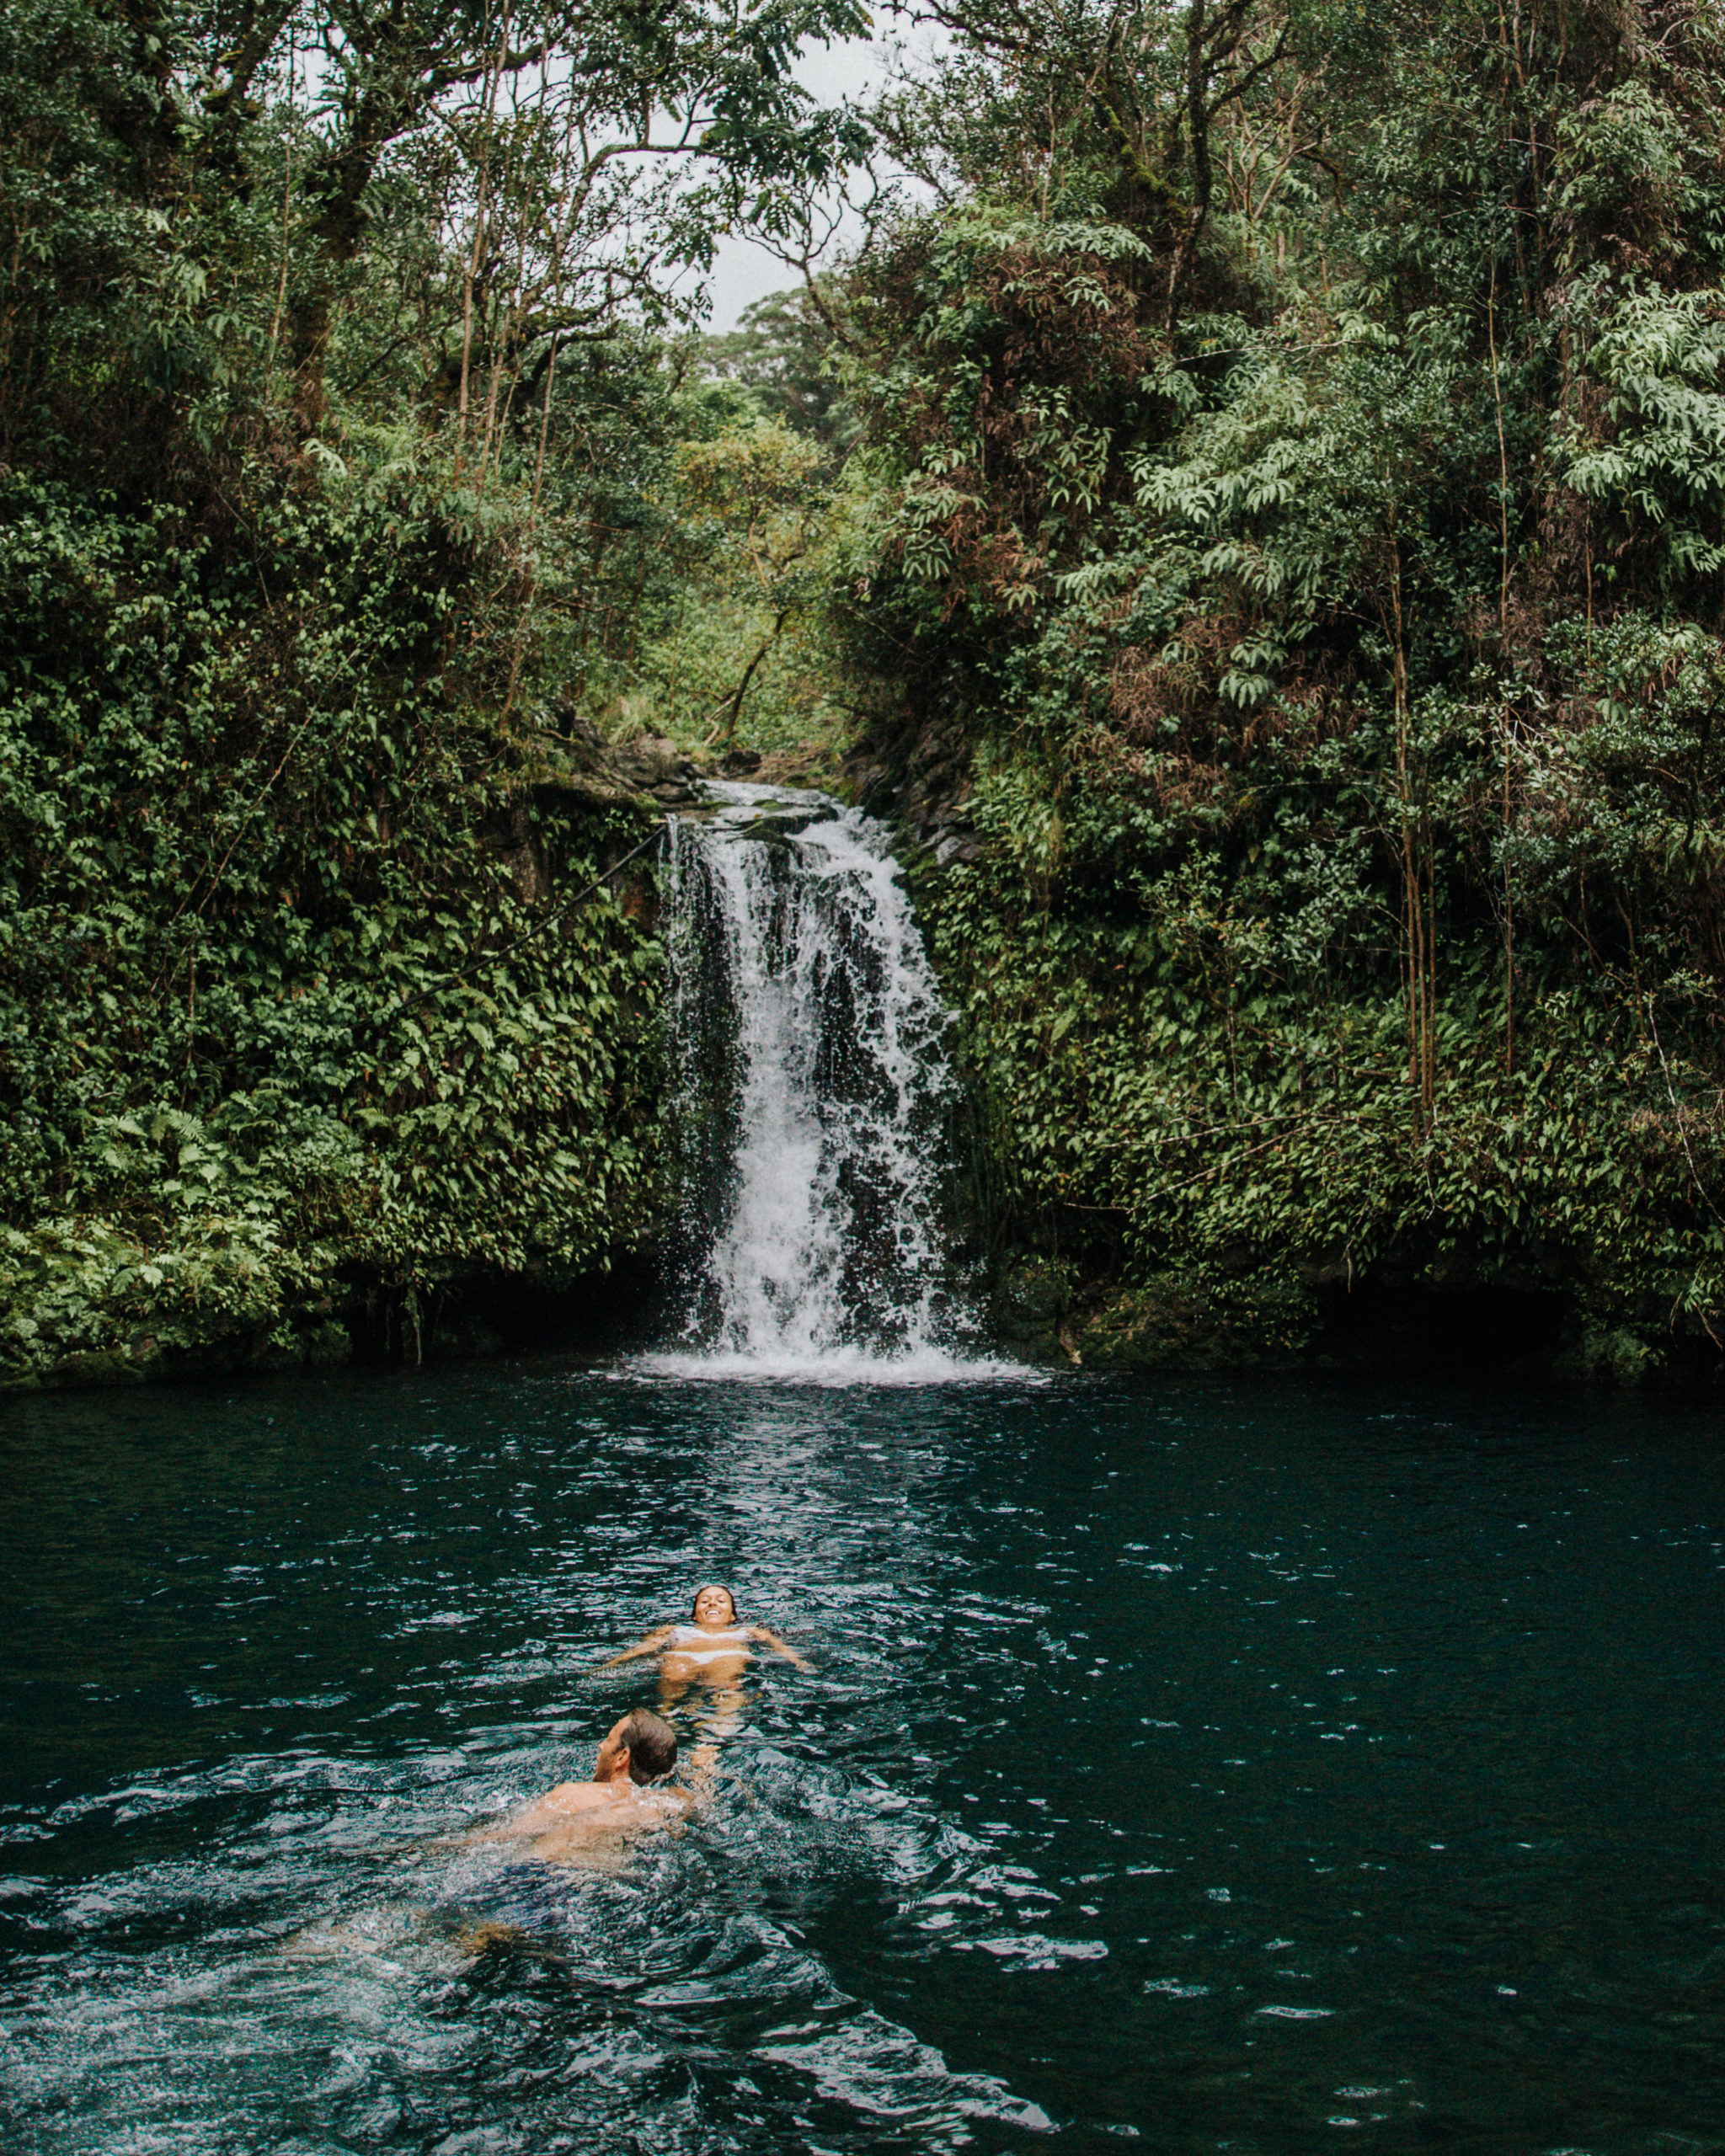 Find the best experiences on Maui in this Maui Travel Guide via @elanaloo & elanaloo.com